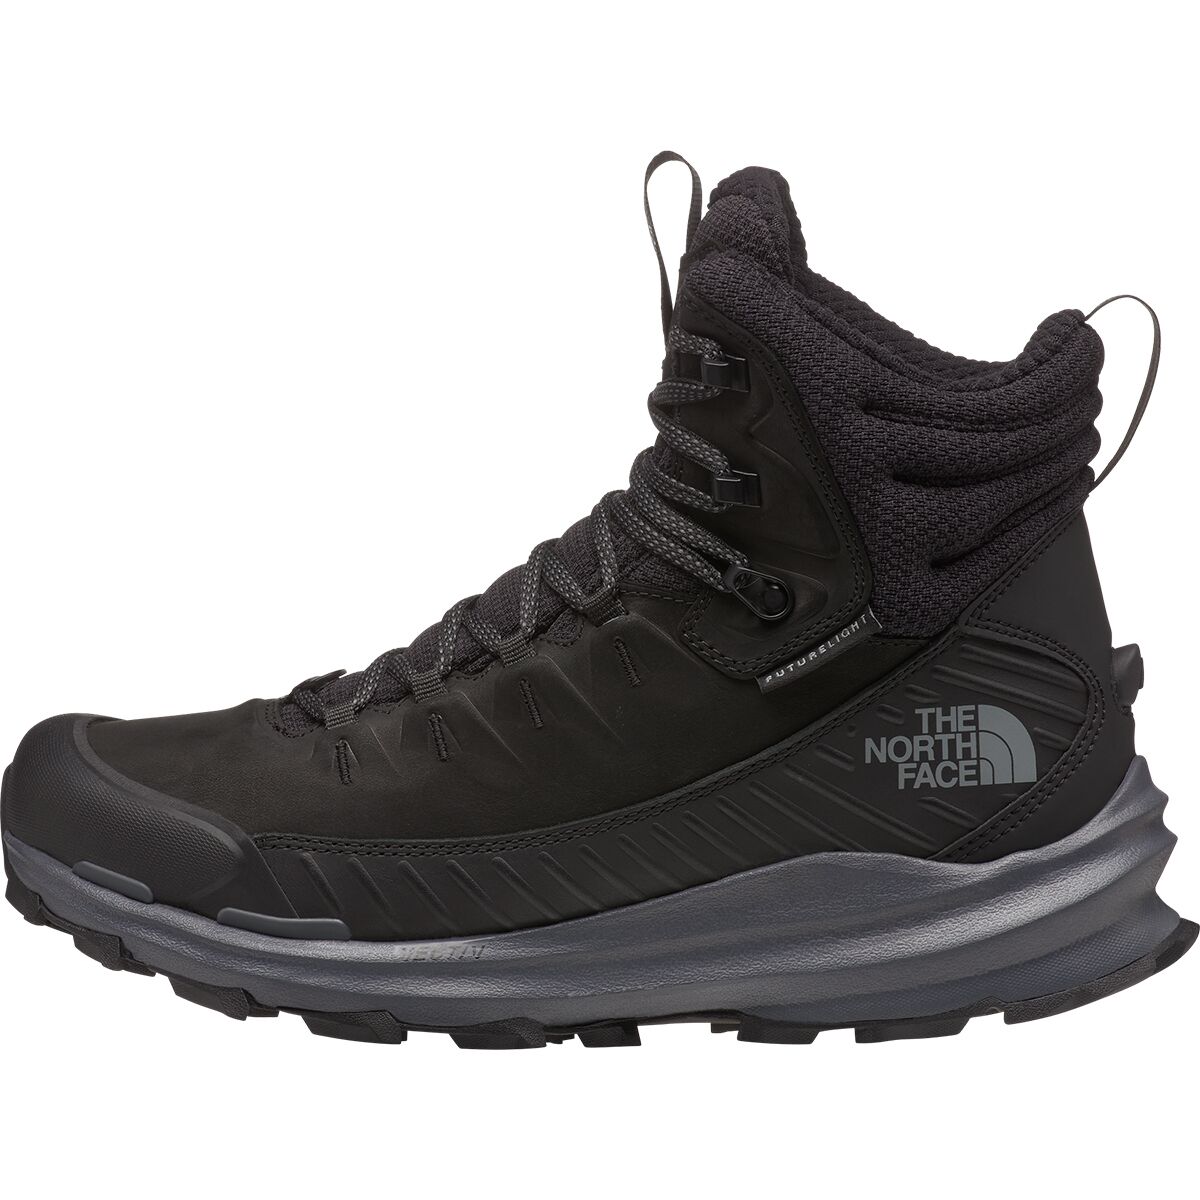 The North Face VECTIV Fastpack Insulated FUTURELIGHT Boot - Men's